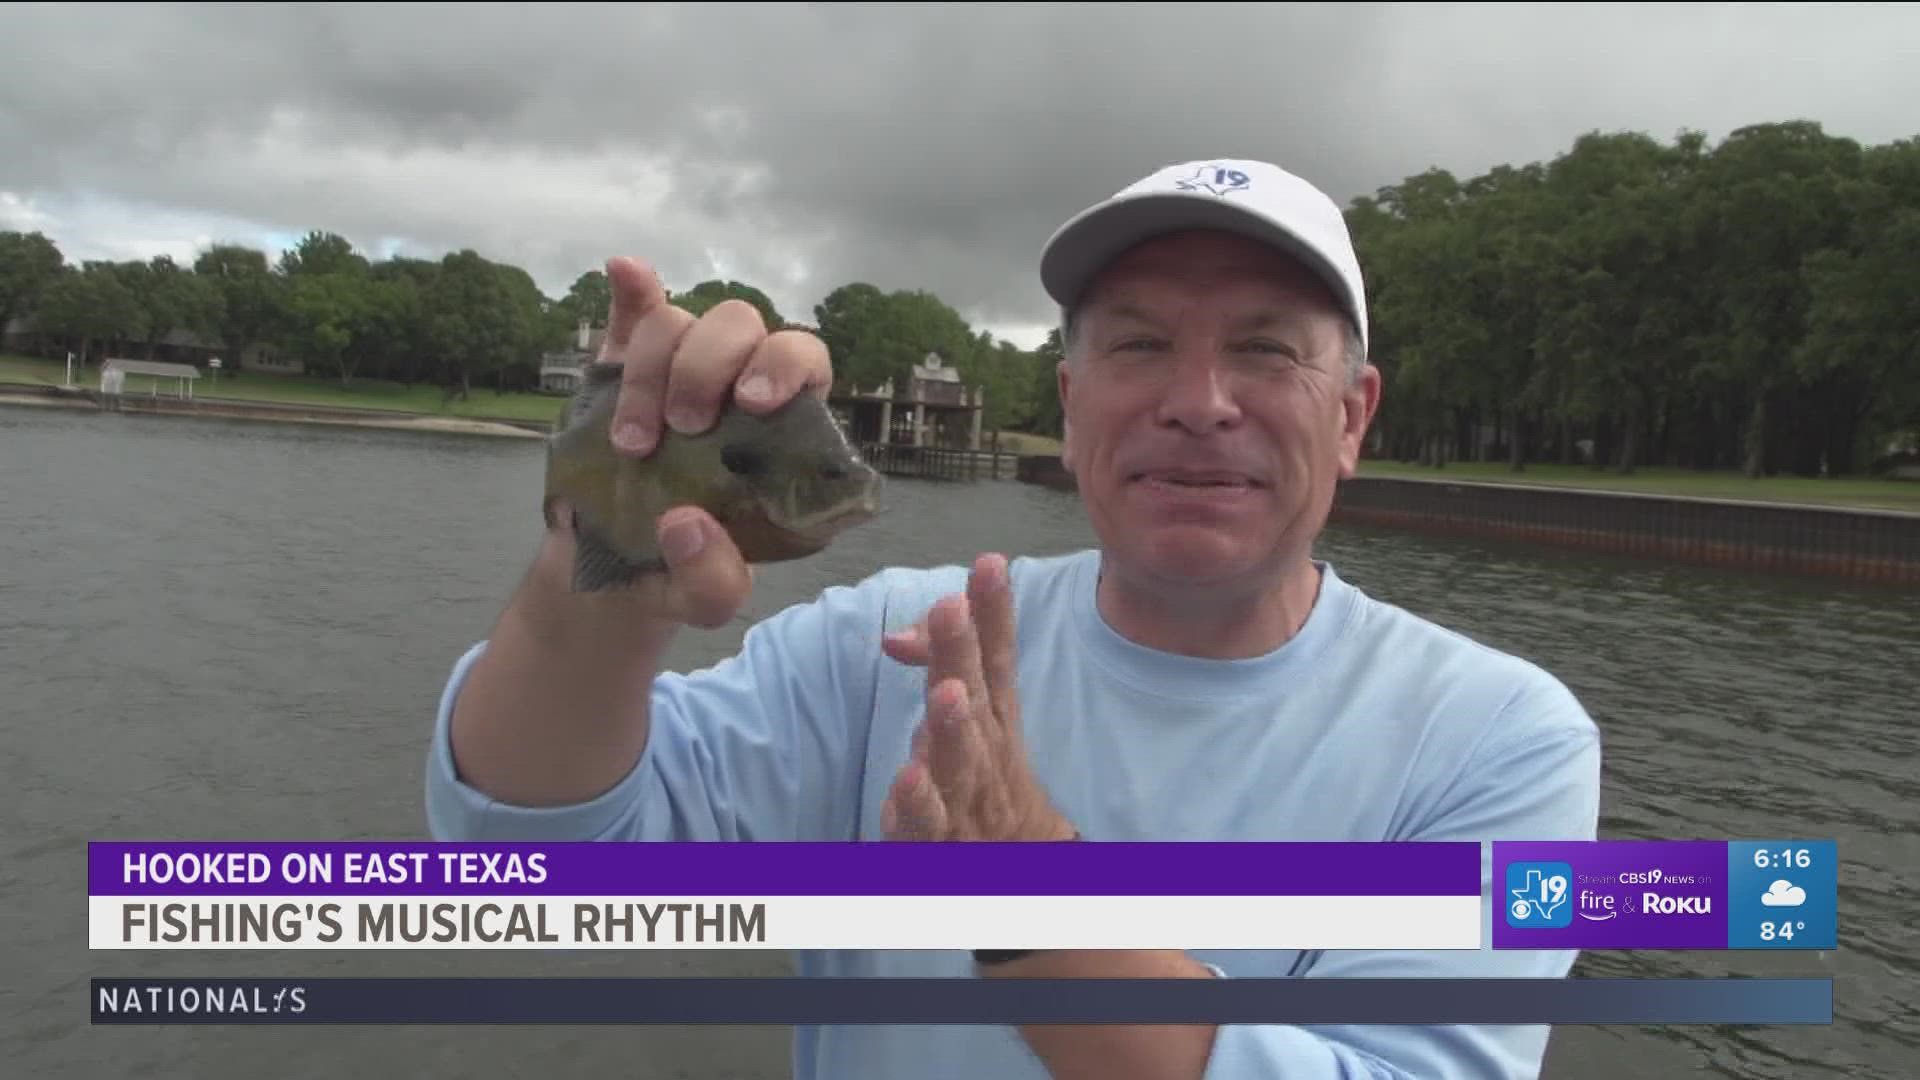 Hooked On East Texas: Fishing's Musical Rhythm